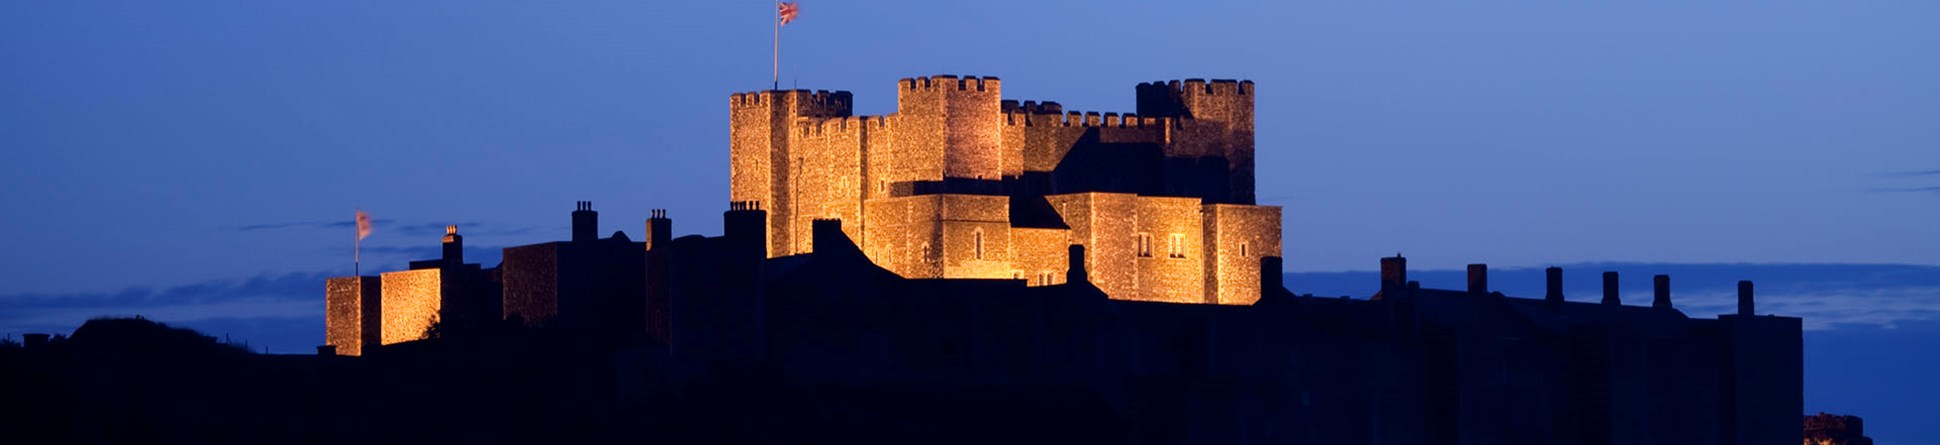 A large medieval castle keep dramatically floodlit at twilight.